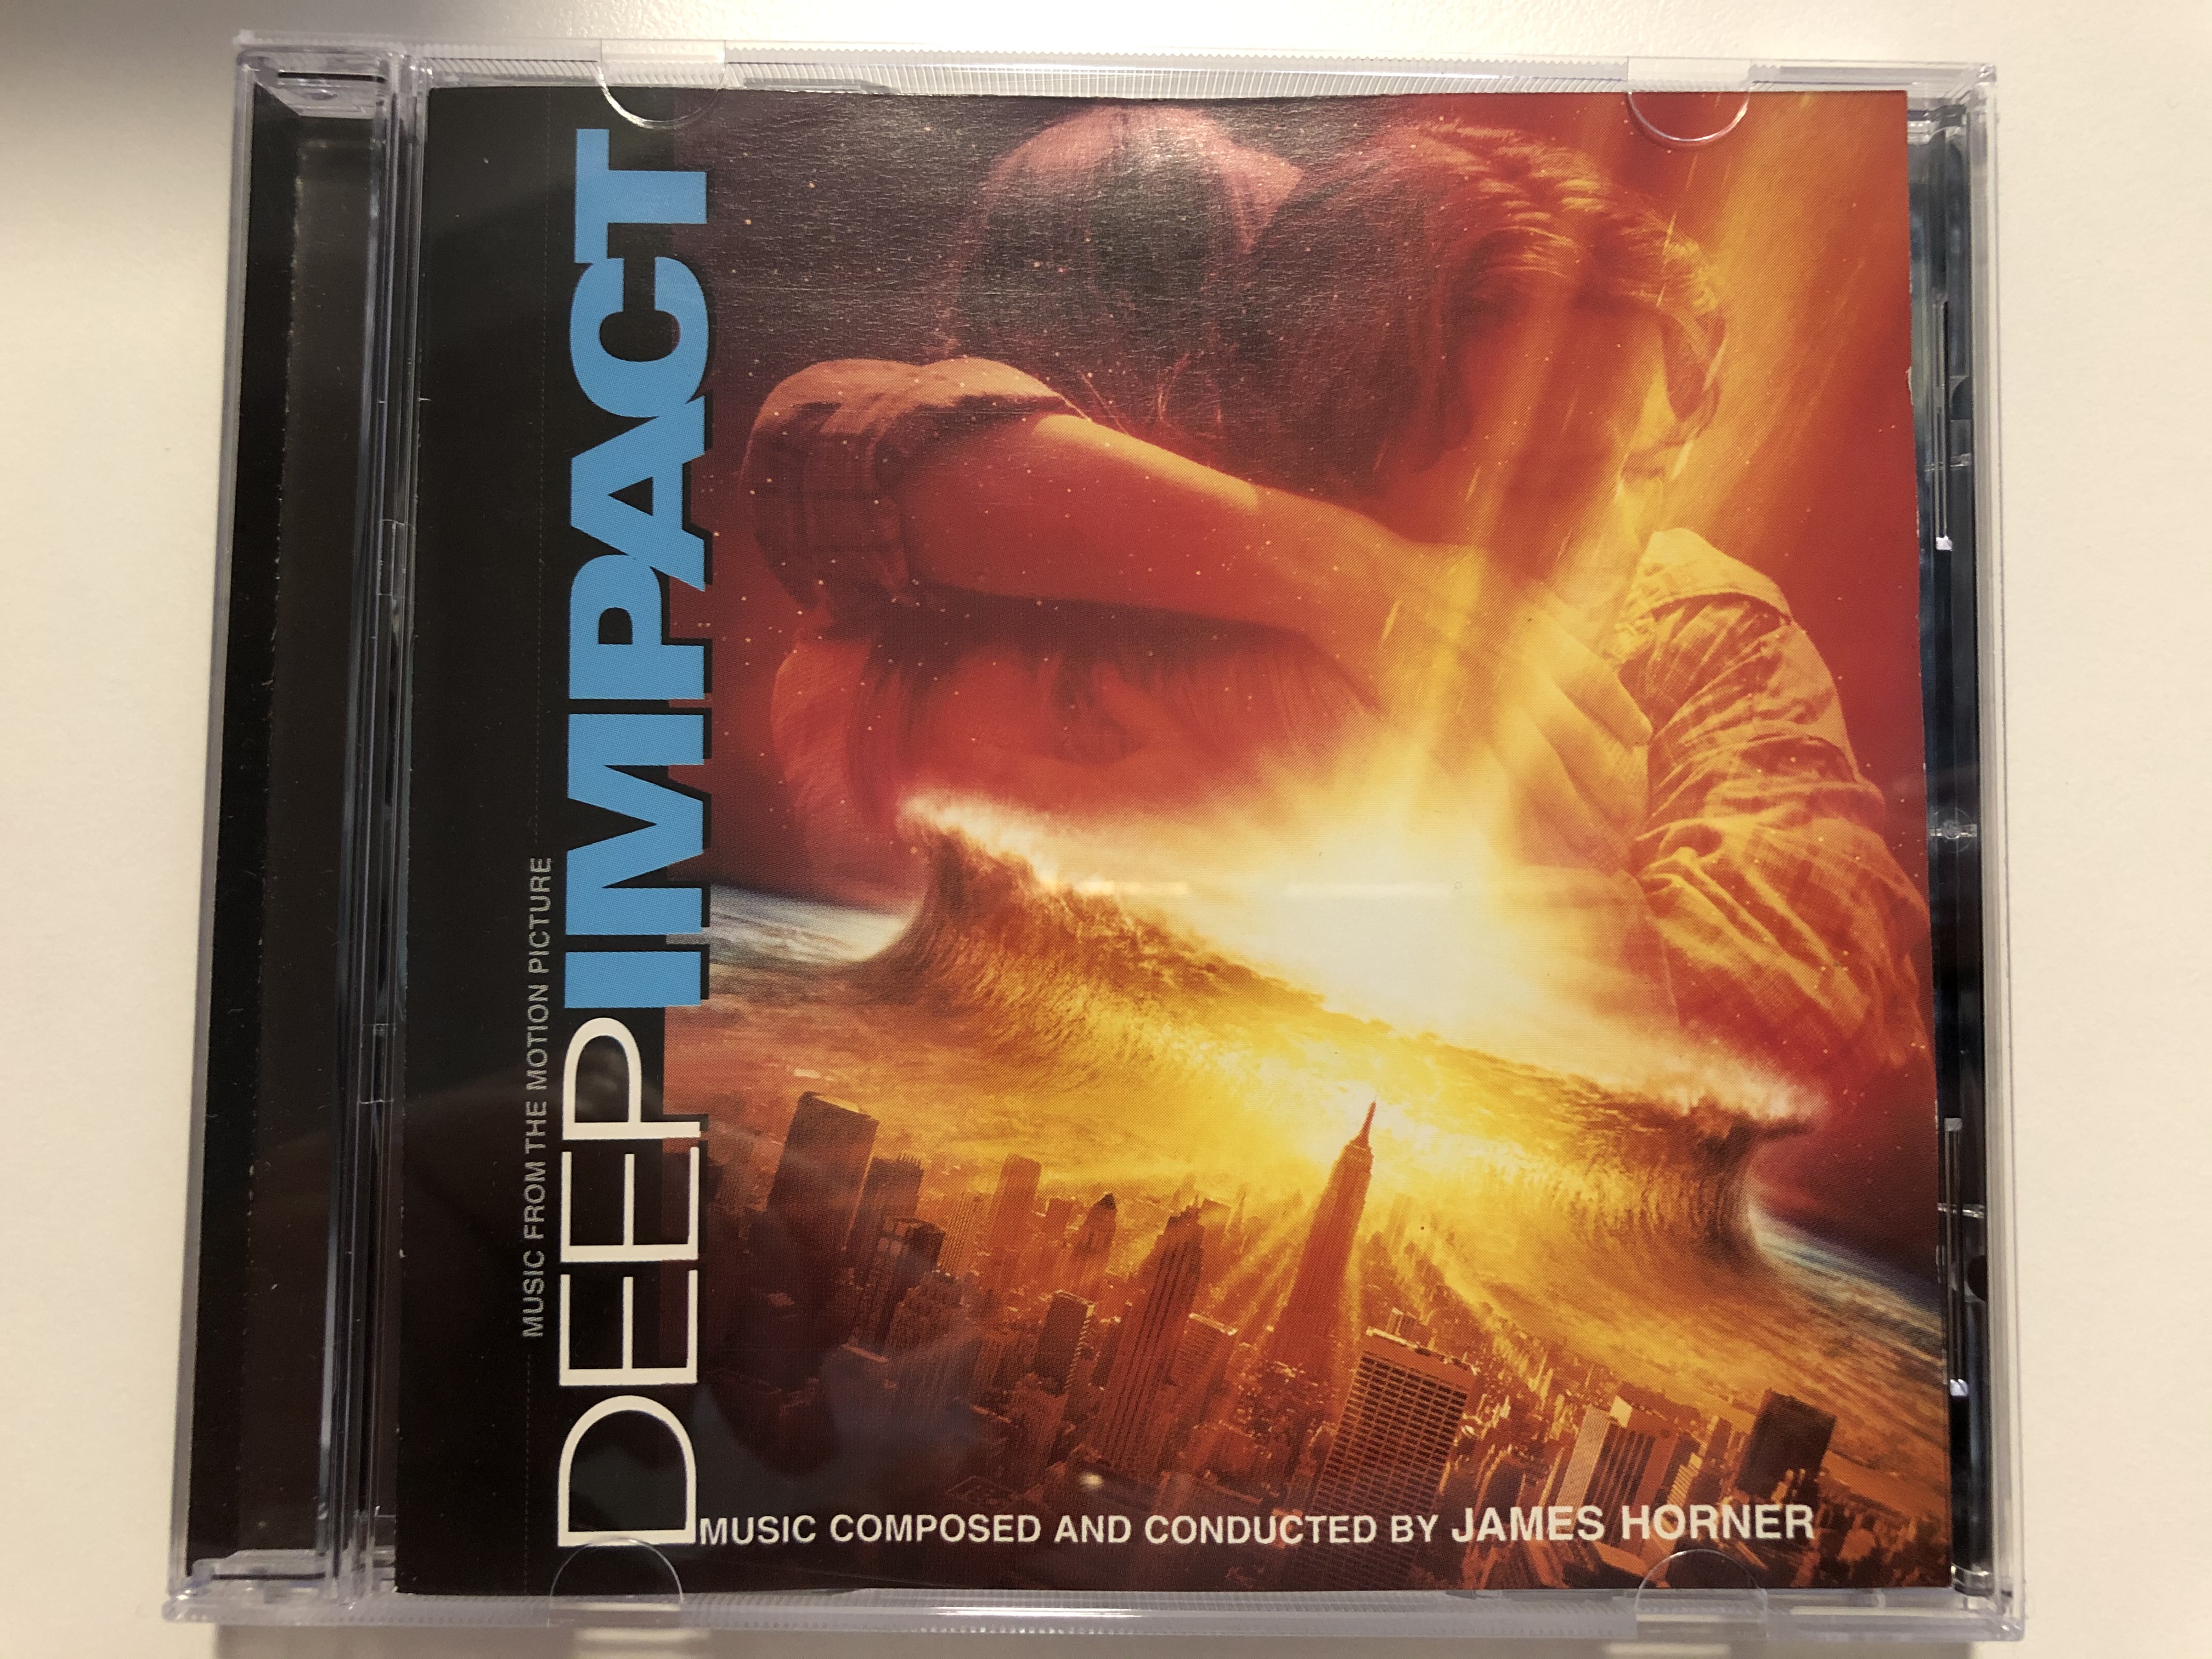 deep-impact-music-from-the-motion-picture-music-composed-and-conducted-by-james-horner-sony-music-soundtrax-audio-cd-1998-sk-60690-1-.jpg